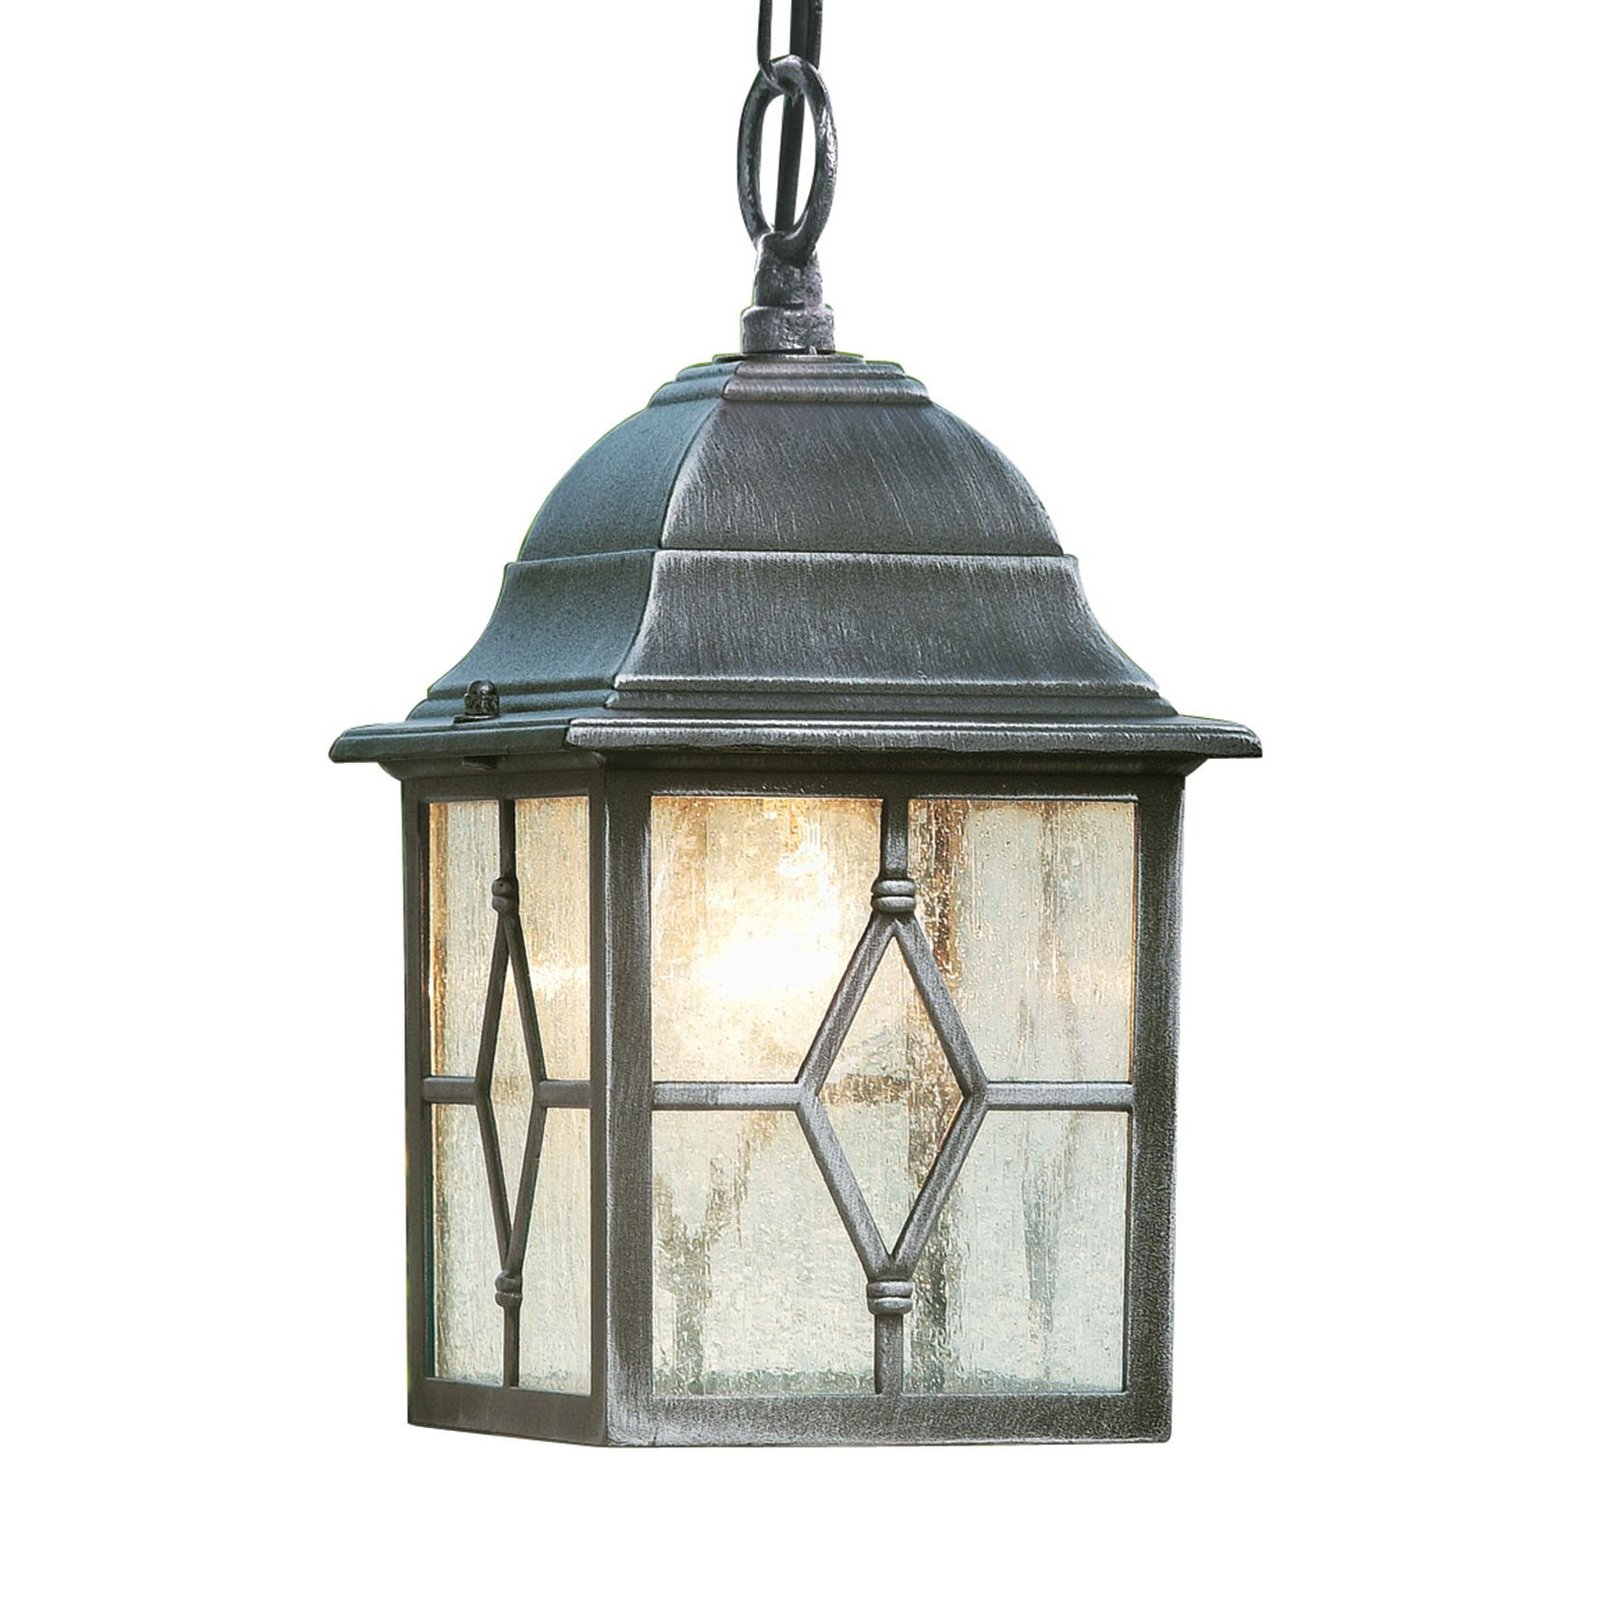 Genoa outdoor hanging light with lead glass